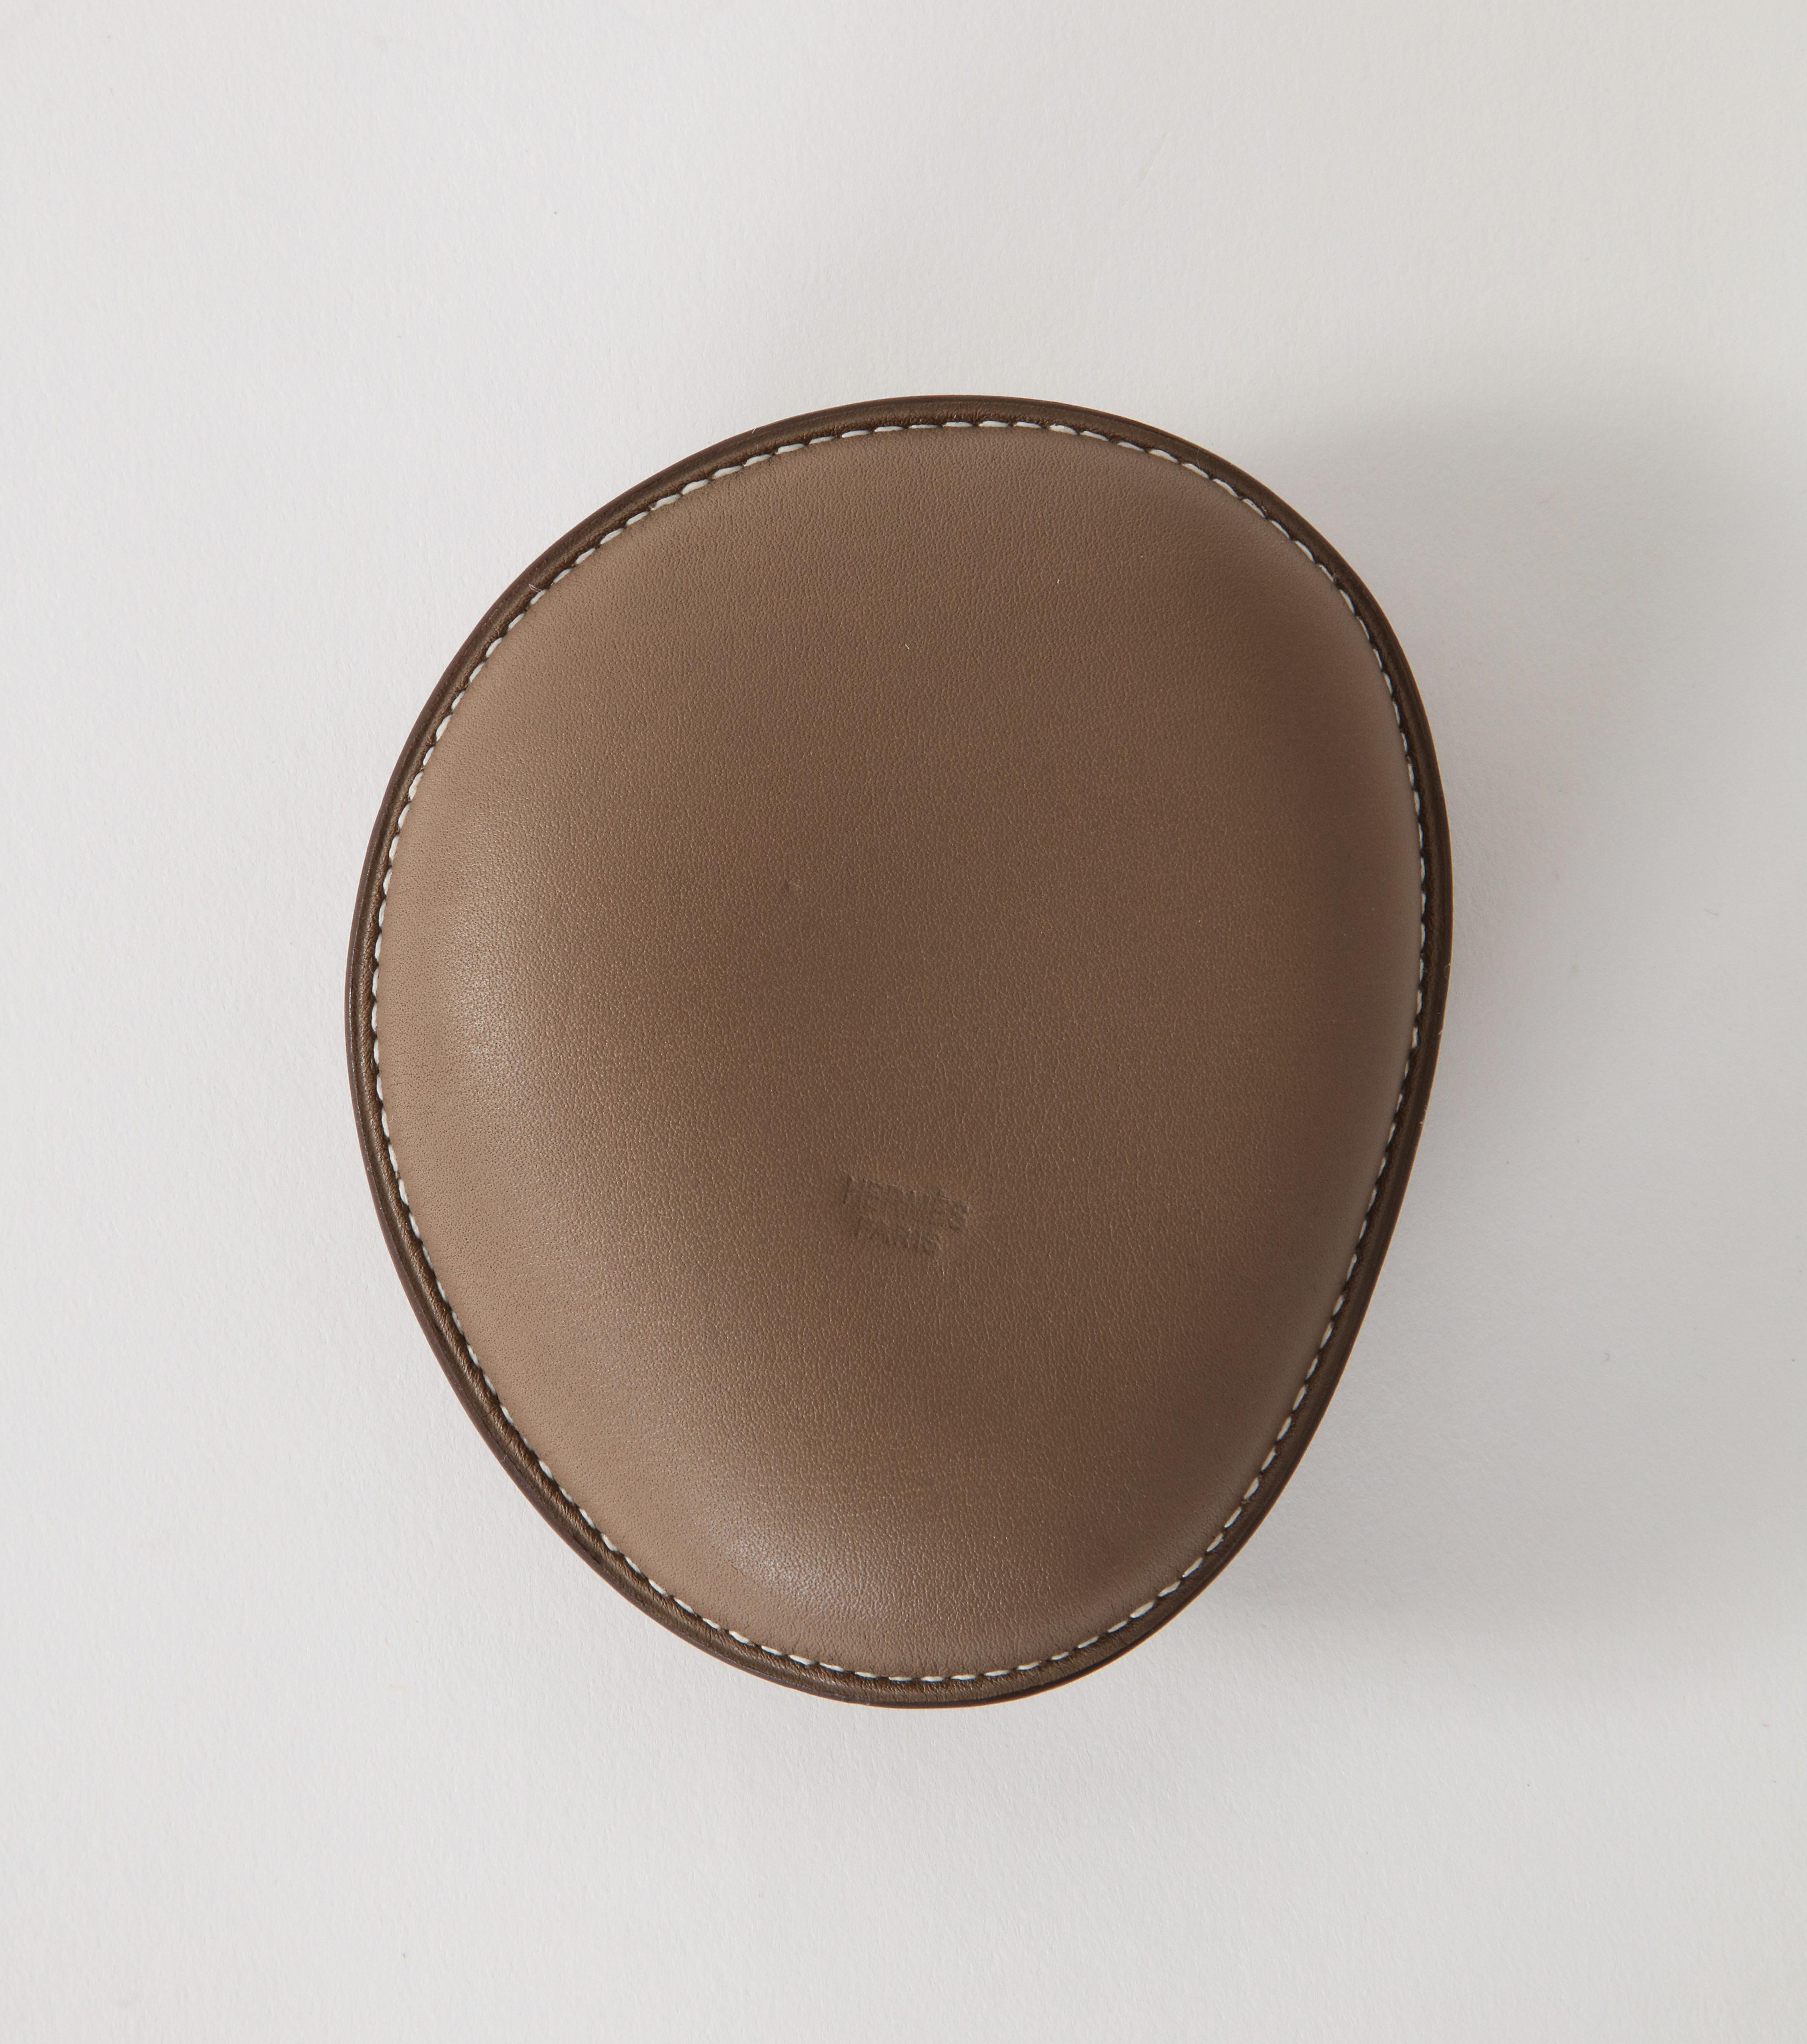 Contemporary Hermès Taupe Leather Paperweight